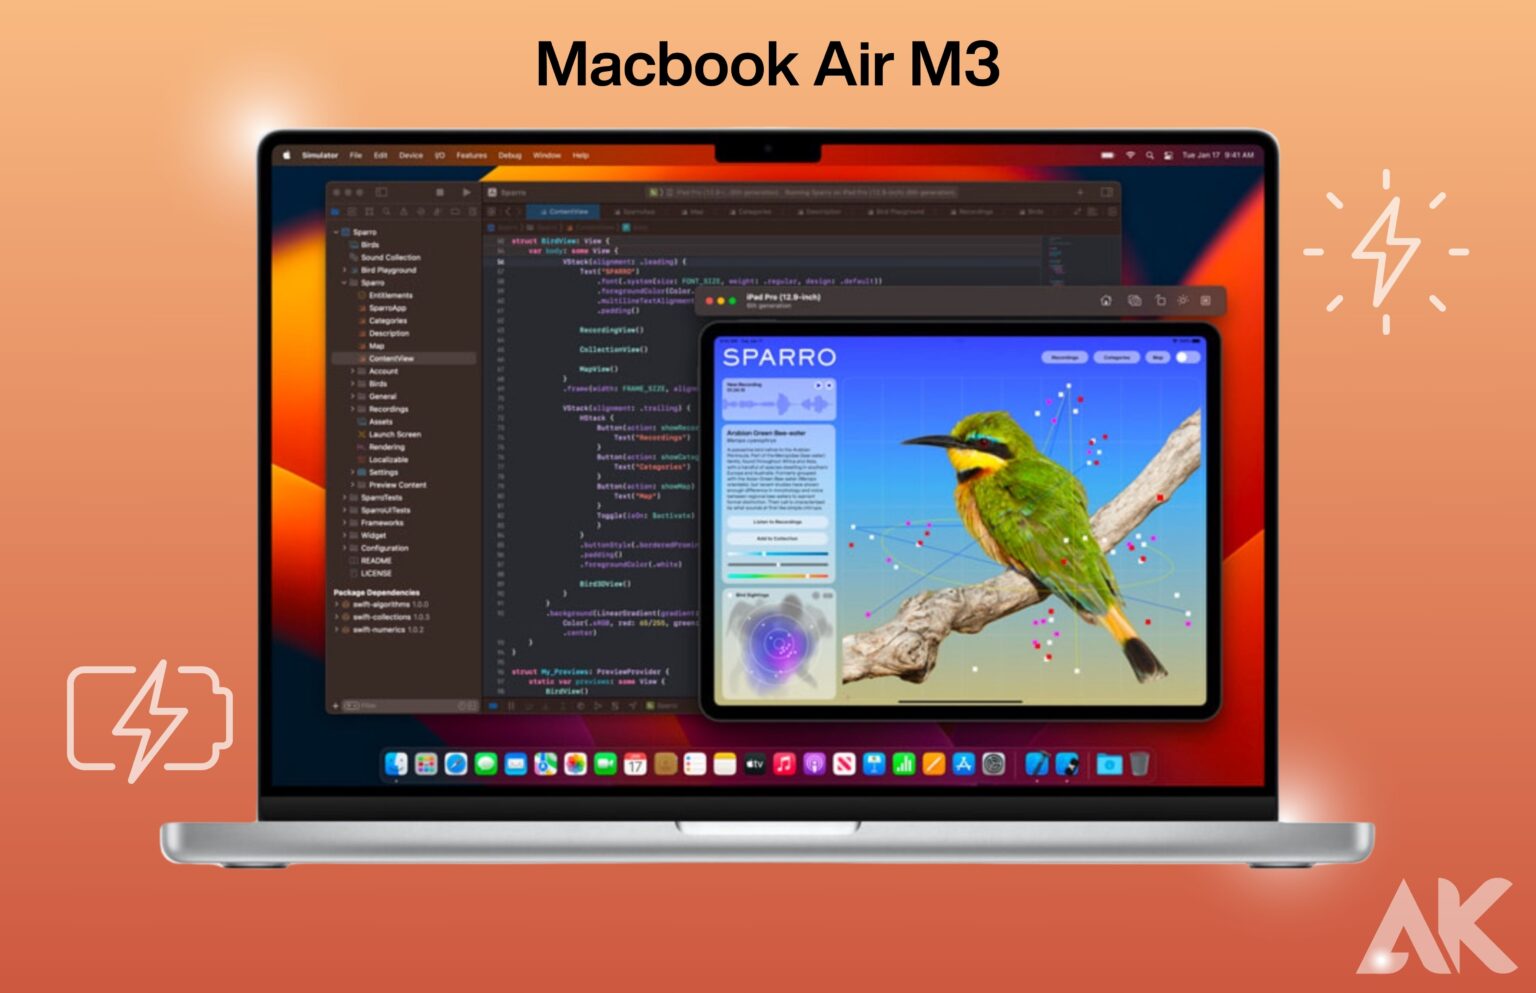 Battery Life Expectations for the 15-inch Macbook Air M3